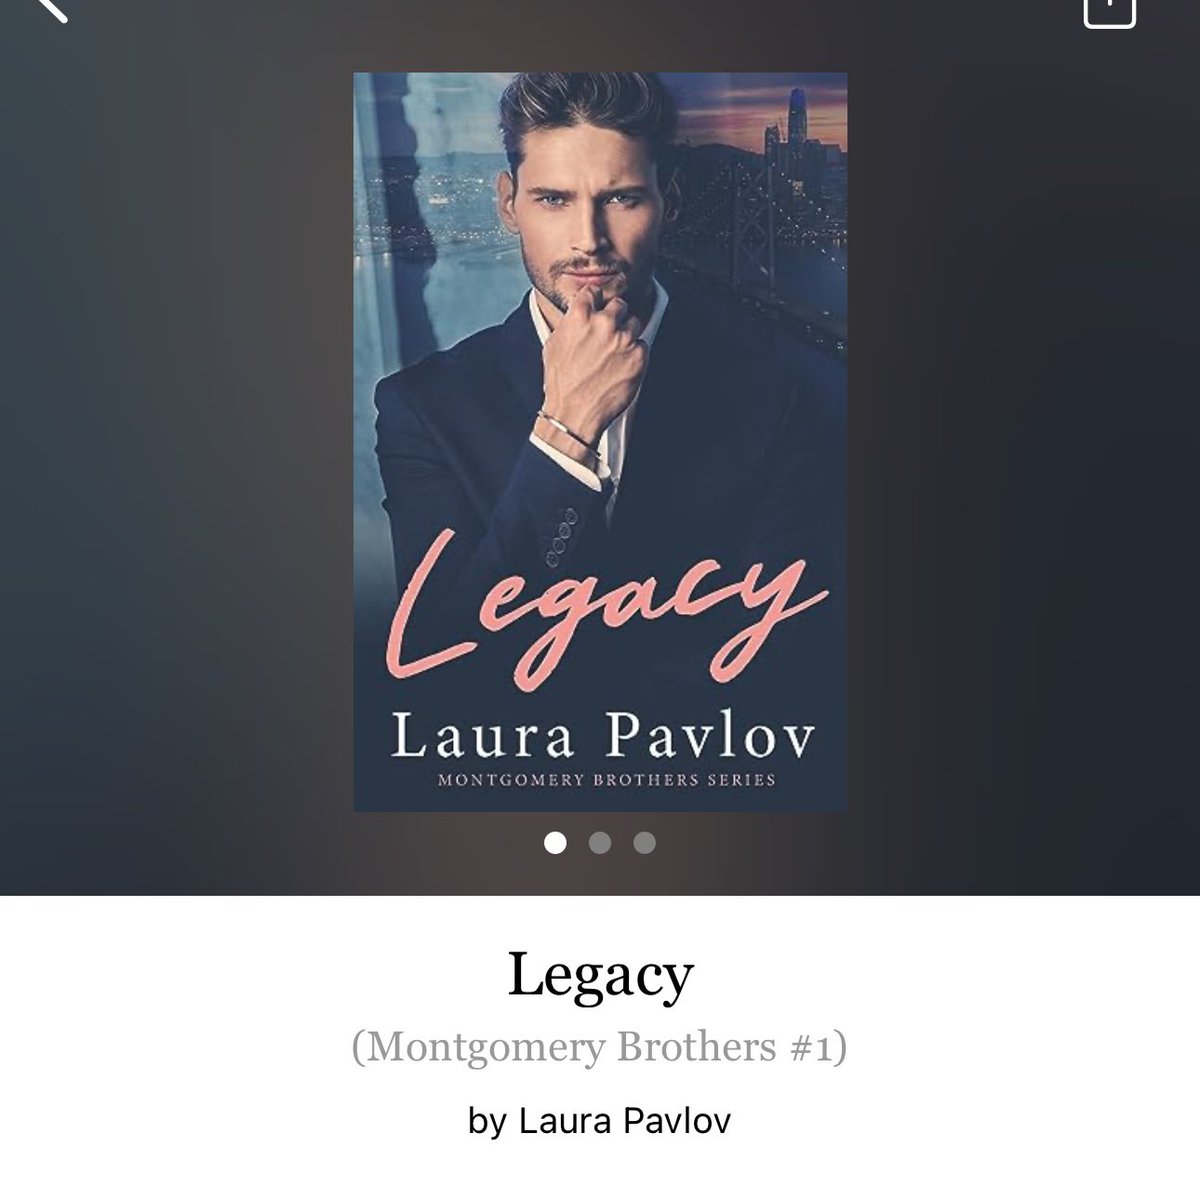 Legacy by Laura Pavlov 

#Legacy by #LauraPavlov #6286 #25chapters #224pages #435of400 #Series #Audiobook #8houraudiobook #MontgomeryBrothersSeries #Book1of3 #FordAndHarley #april2024 #clearingoffreadingshelves #whatsnext #readitquick